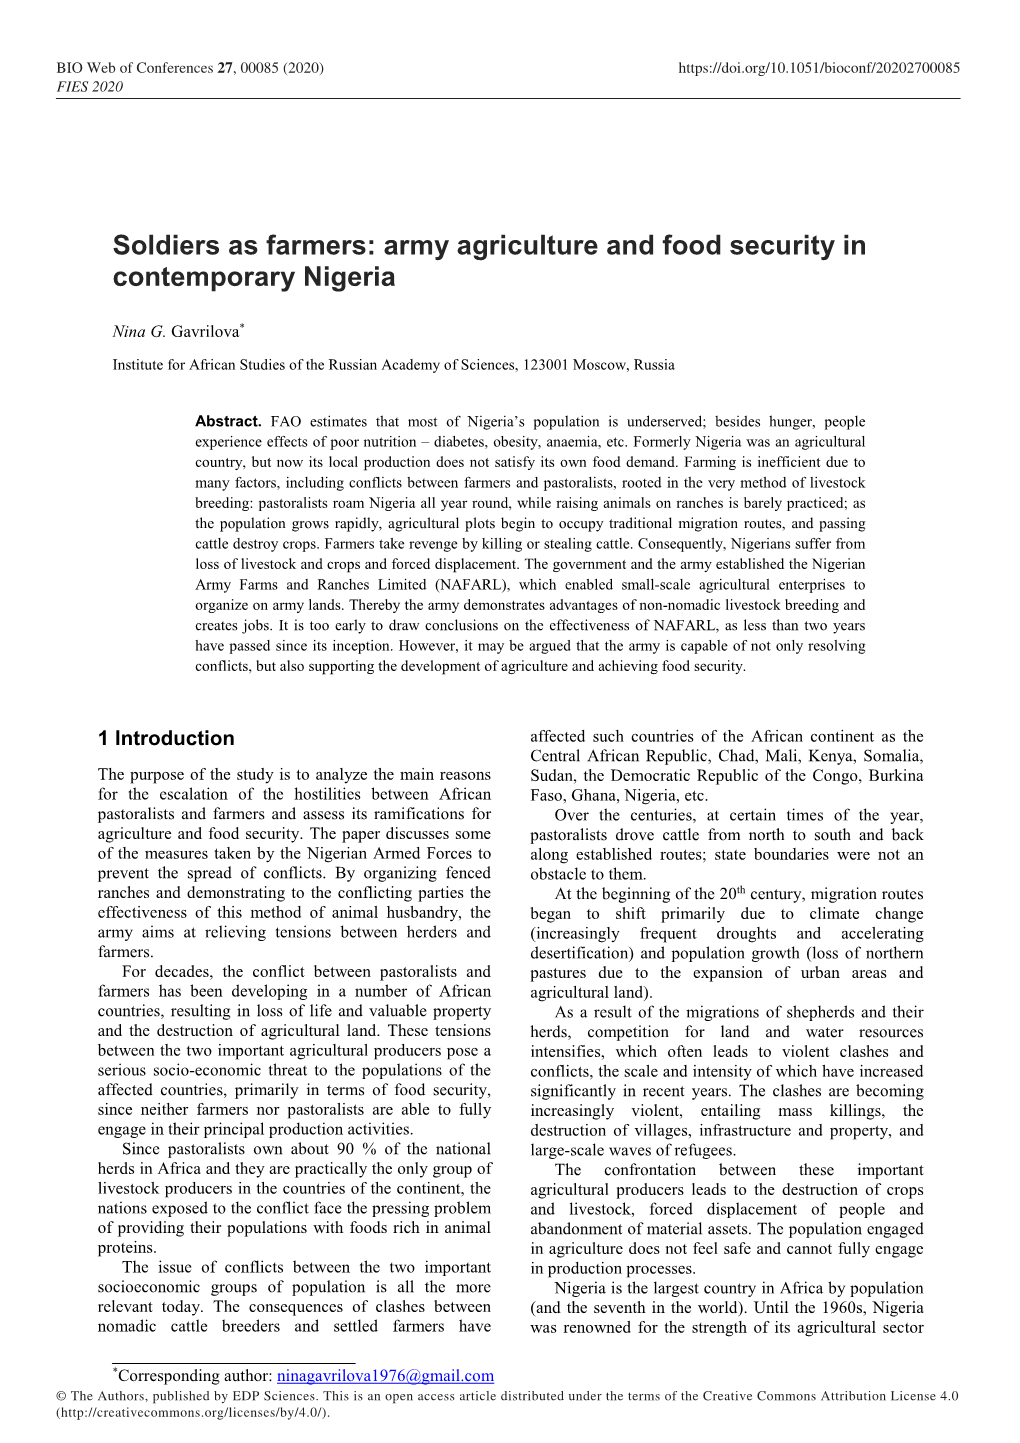 Soldiers As Farmers: Army Agriculture and Food Security in Contemporary Nigeria